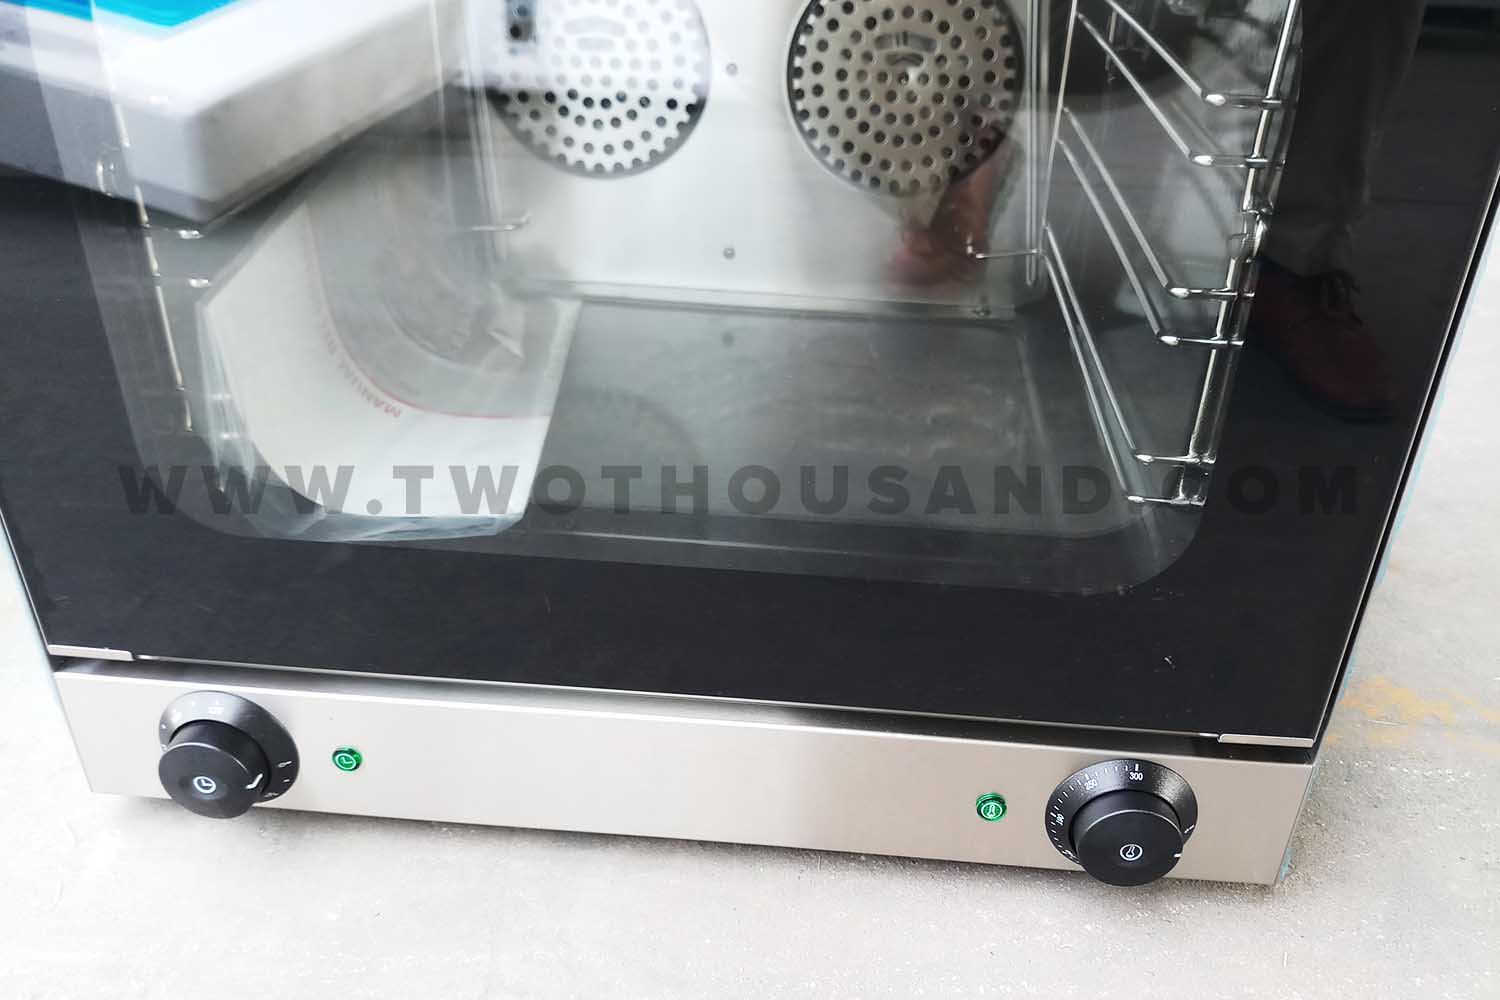 Control Panel of Electric Convection Oven